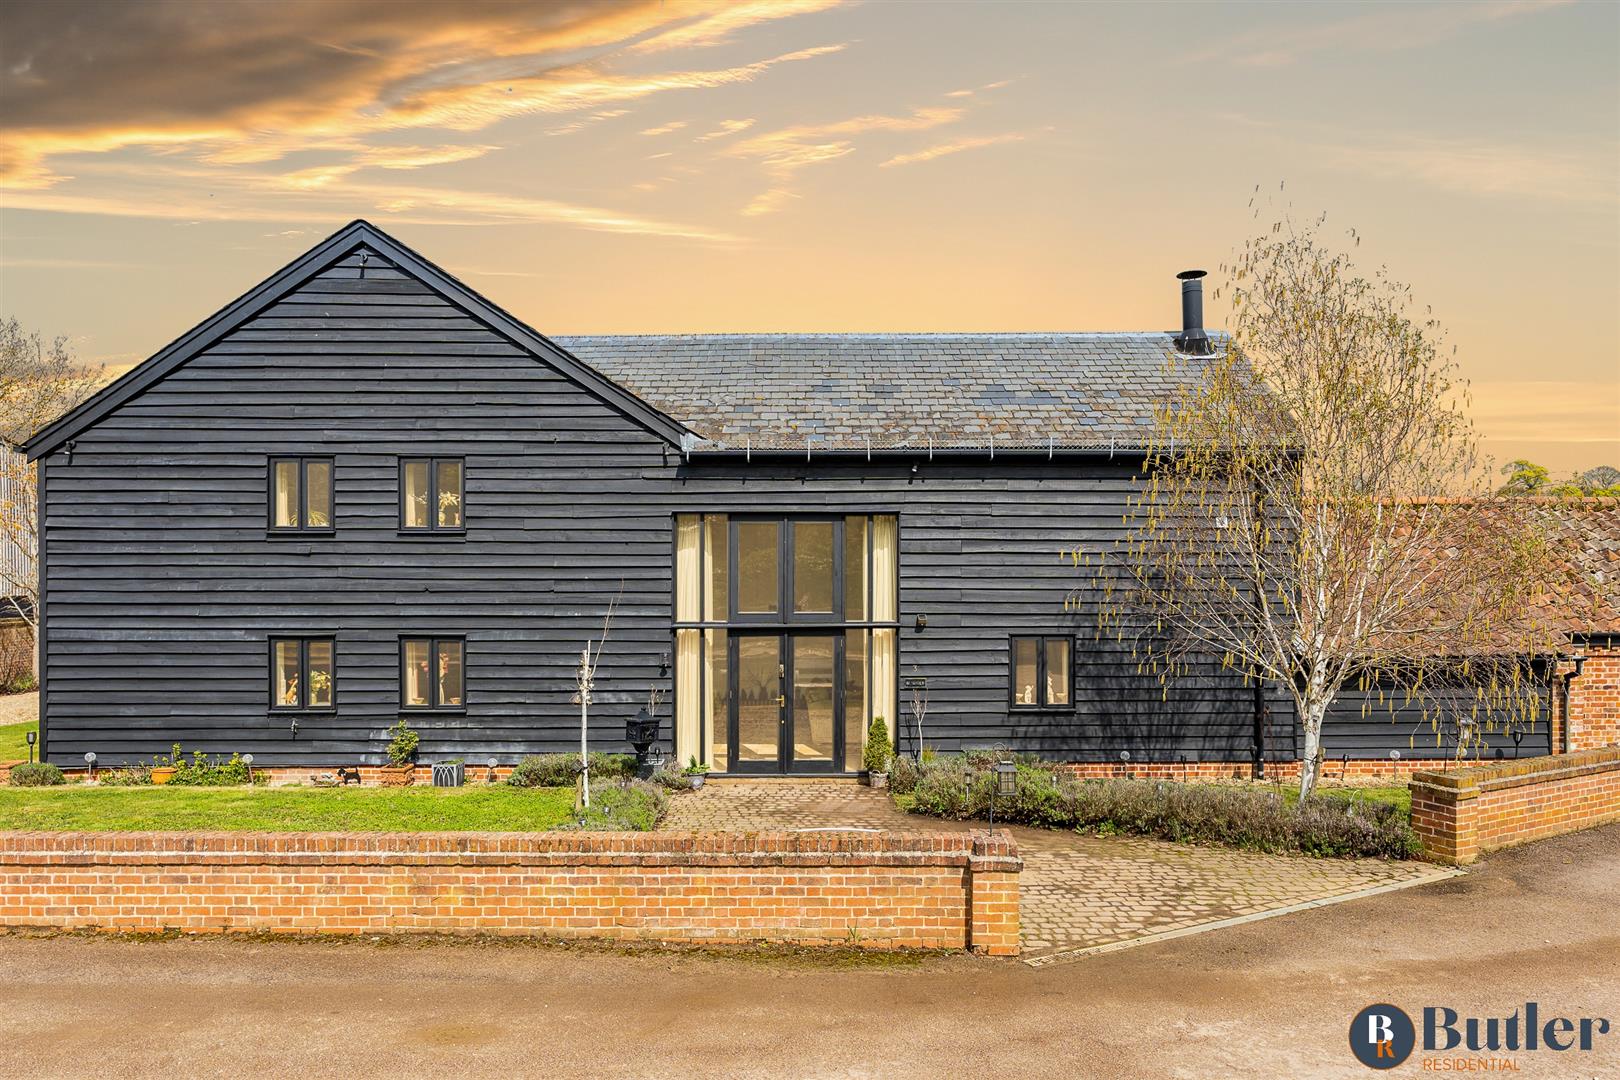 4 bed barn conversion for sale in High Street, Walkern - Property Image 1